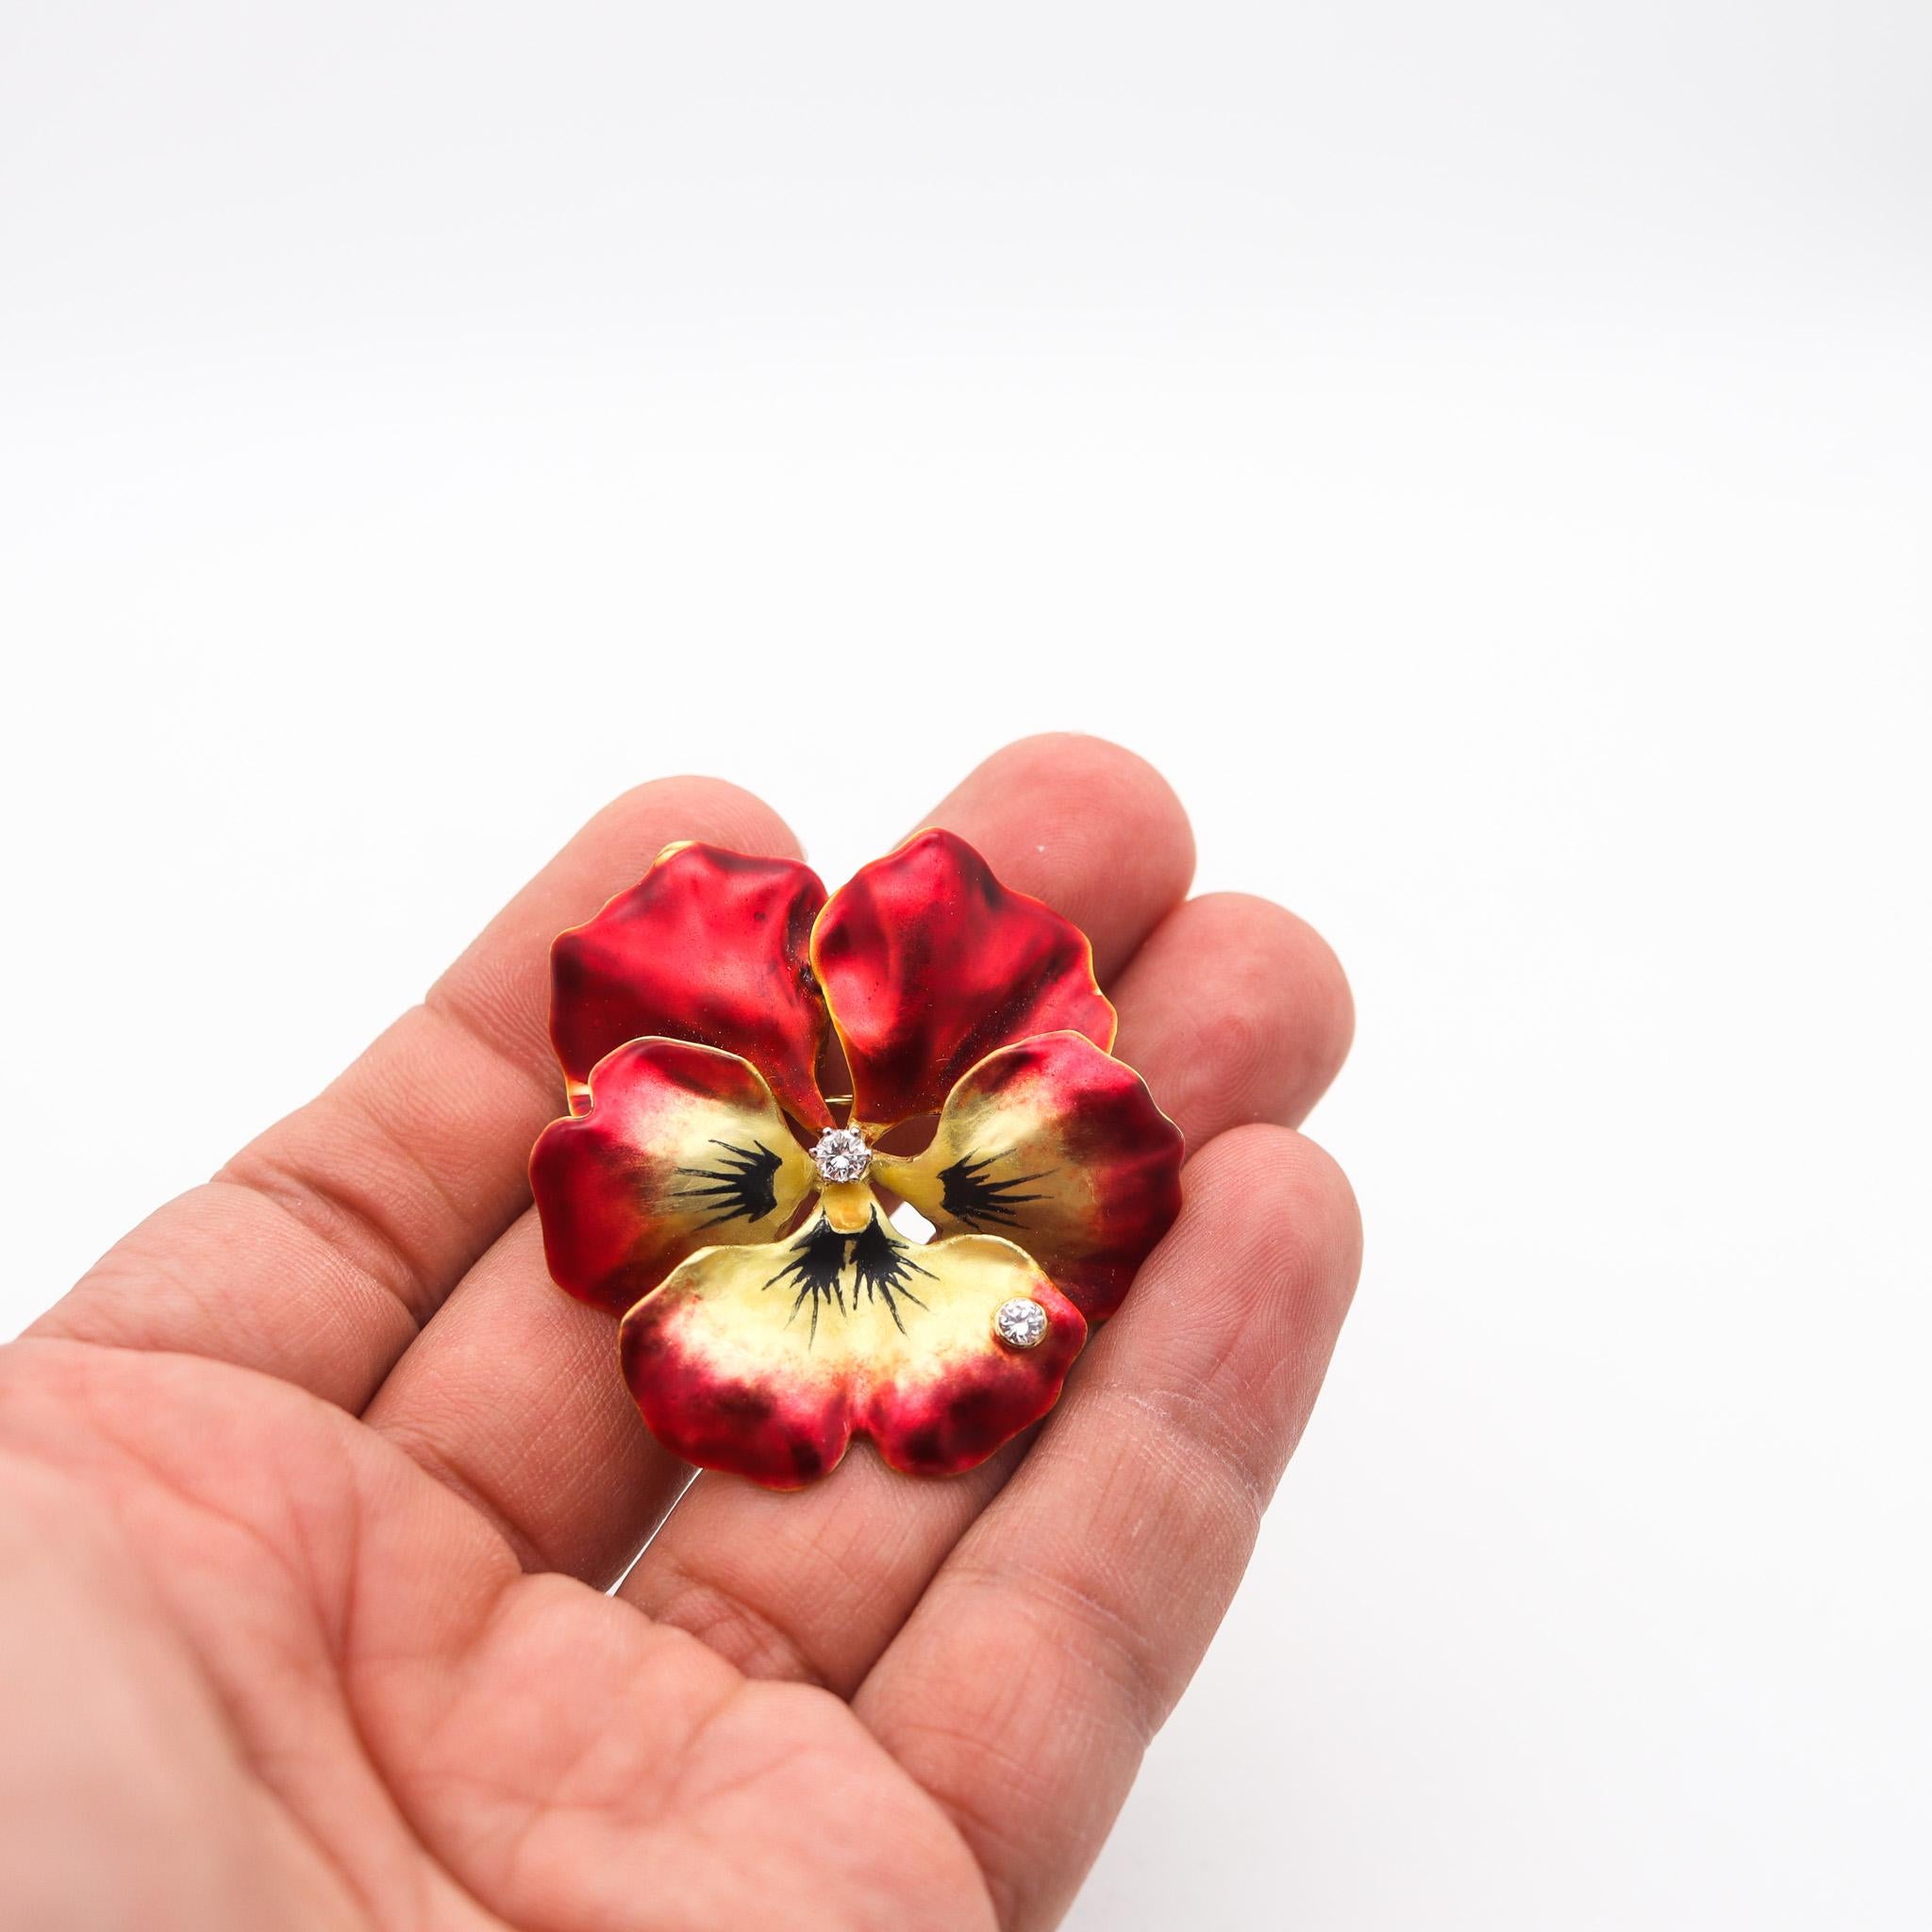 Women's Art Nouveau 1910 Red Enamel Orchid Brooch In 18Kt Yellow Gold With VS Diamonds For Sale